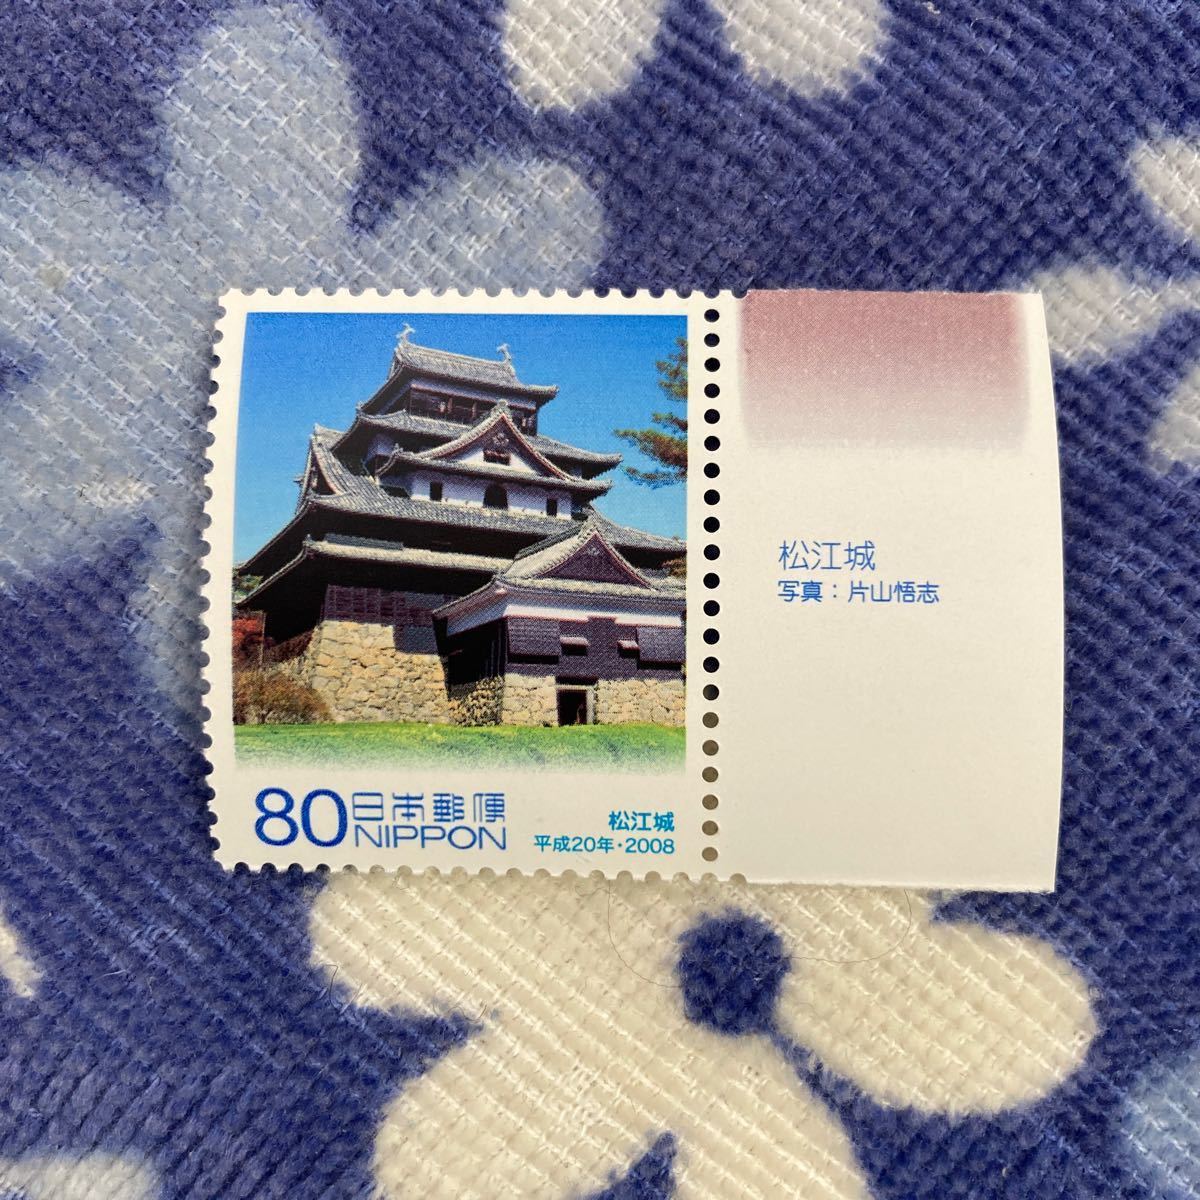  stamp unused .... Matsue castle Shimane local government law . line 60 anniversary ....-16 [ Heisei era 20 year 12 month 8 day ] 80 jpy stamp prompt decision * postage 63 jpy 